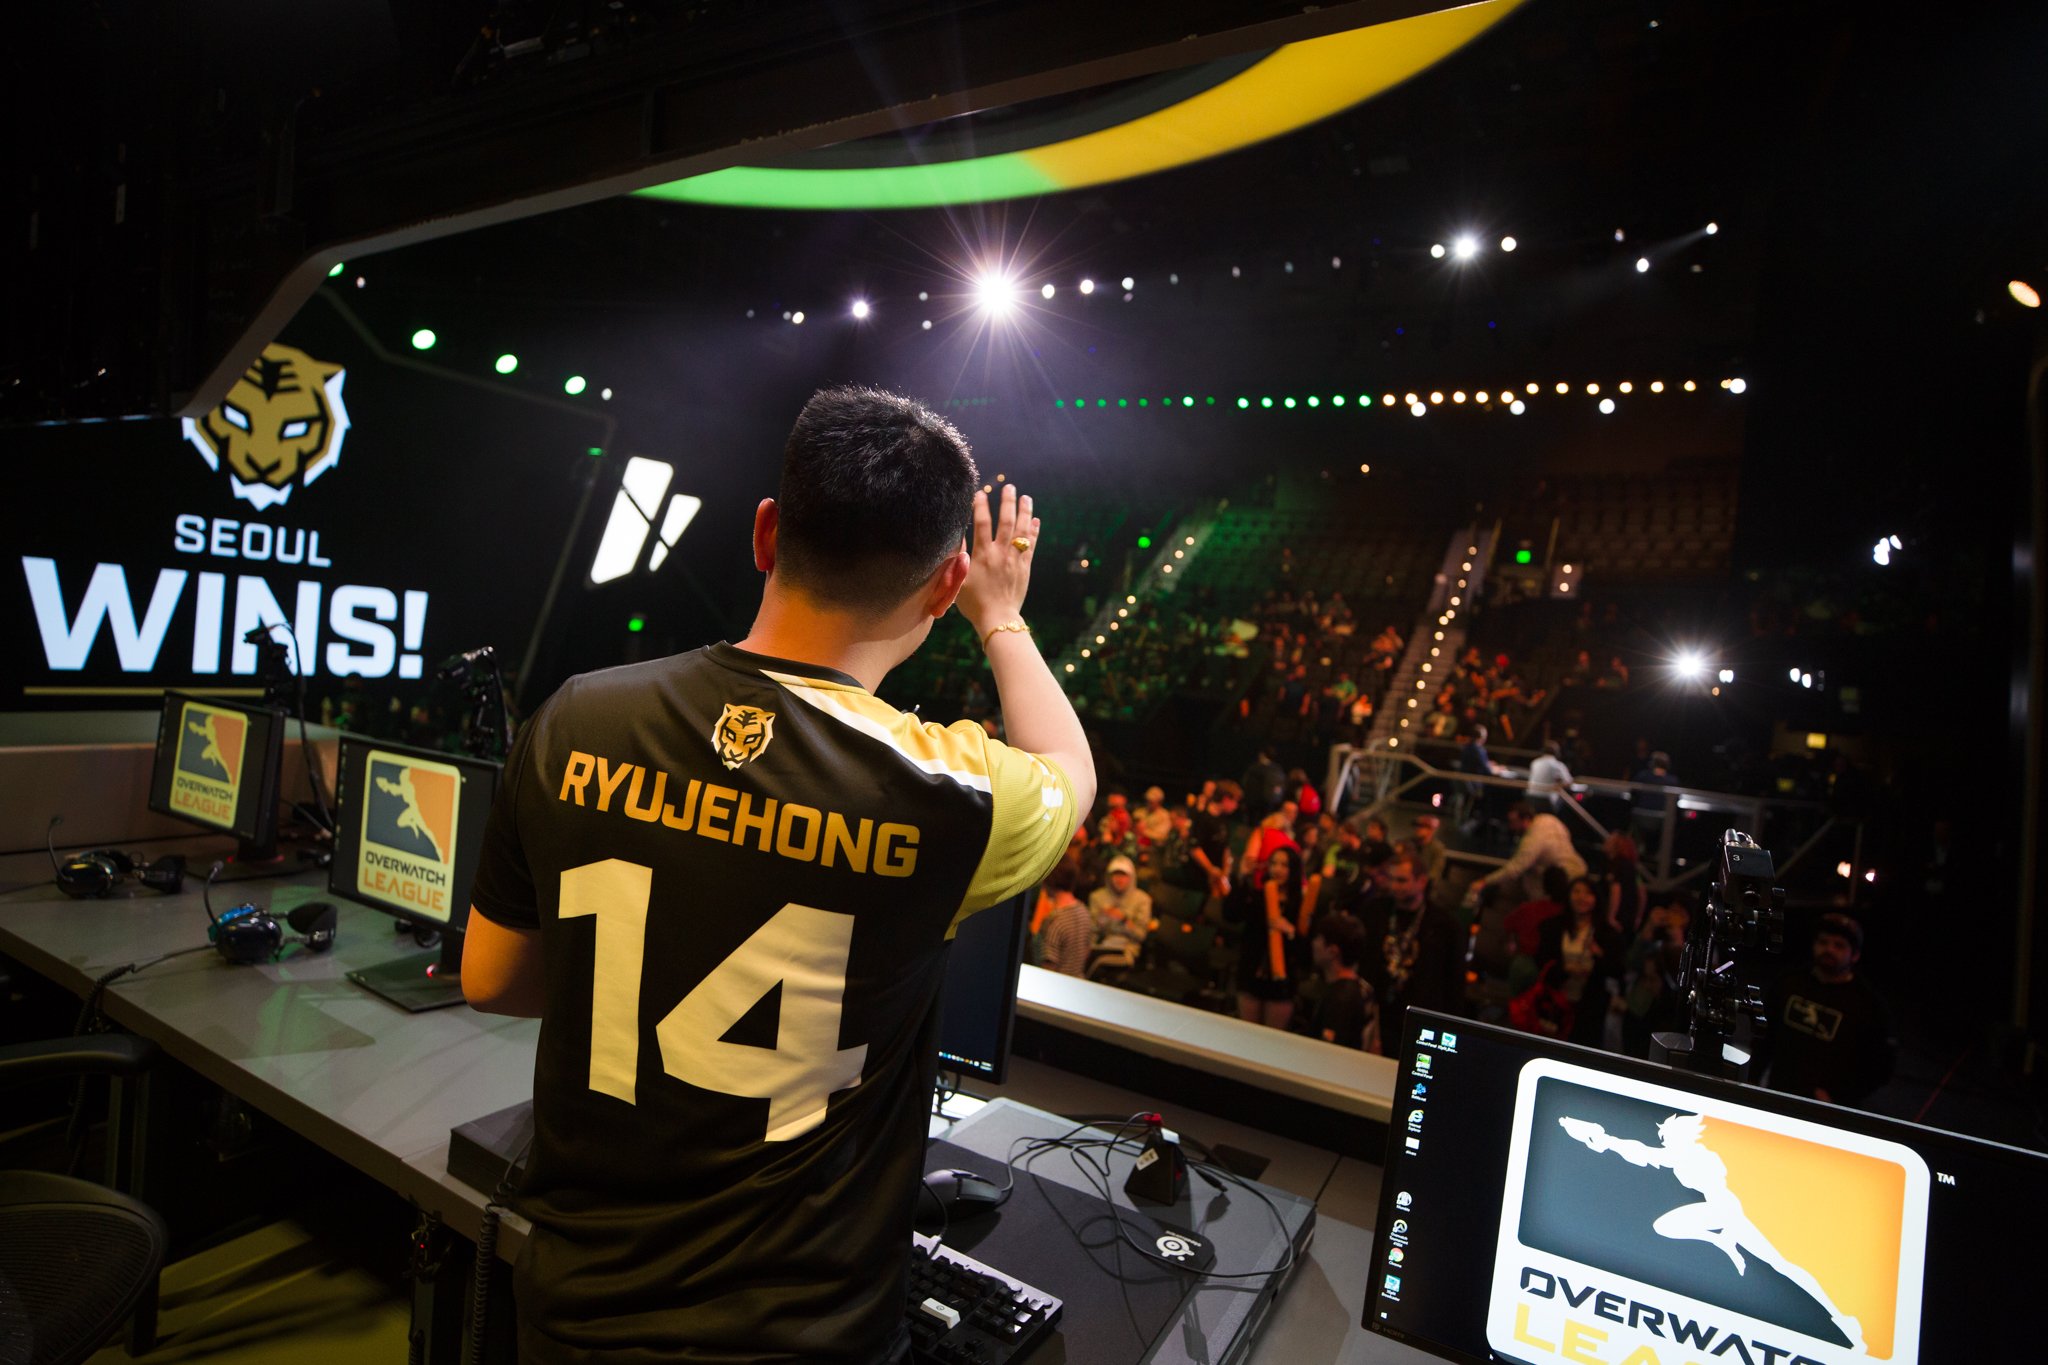 Overwatch League will stream on Twitch thanks to a multi-year media rights deal